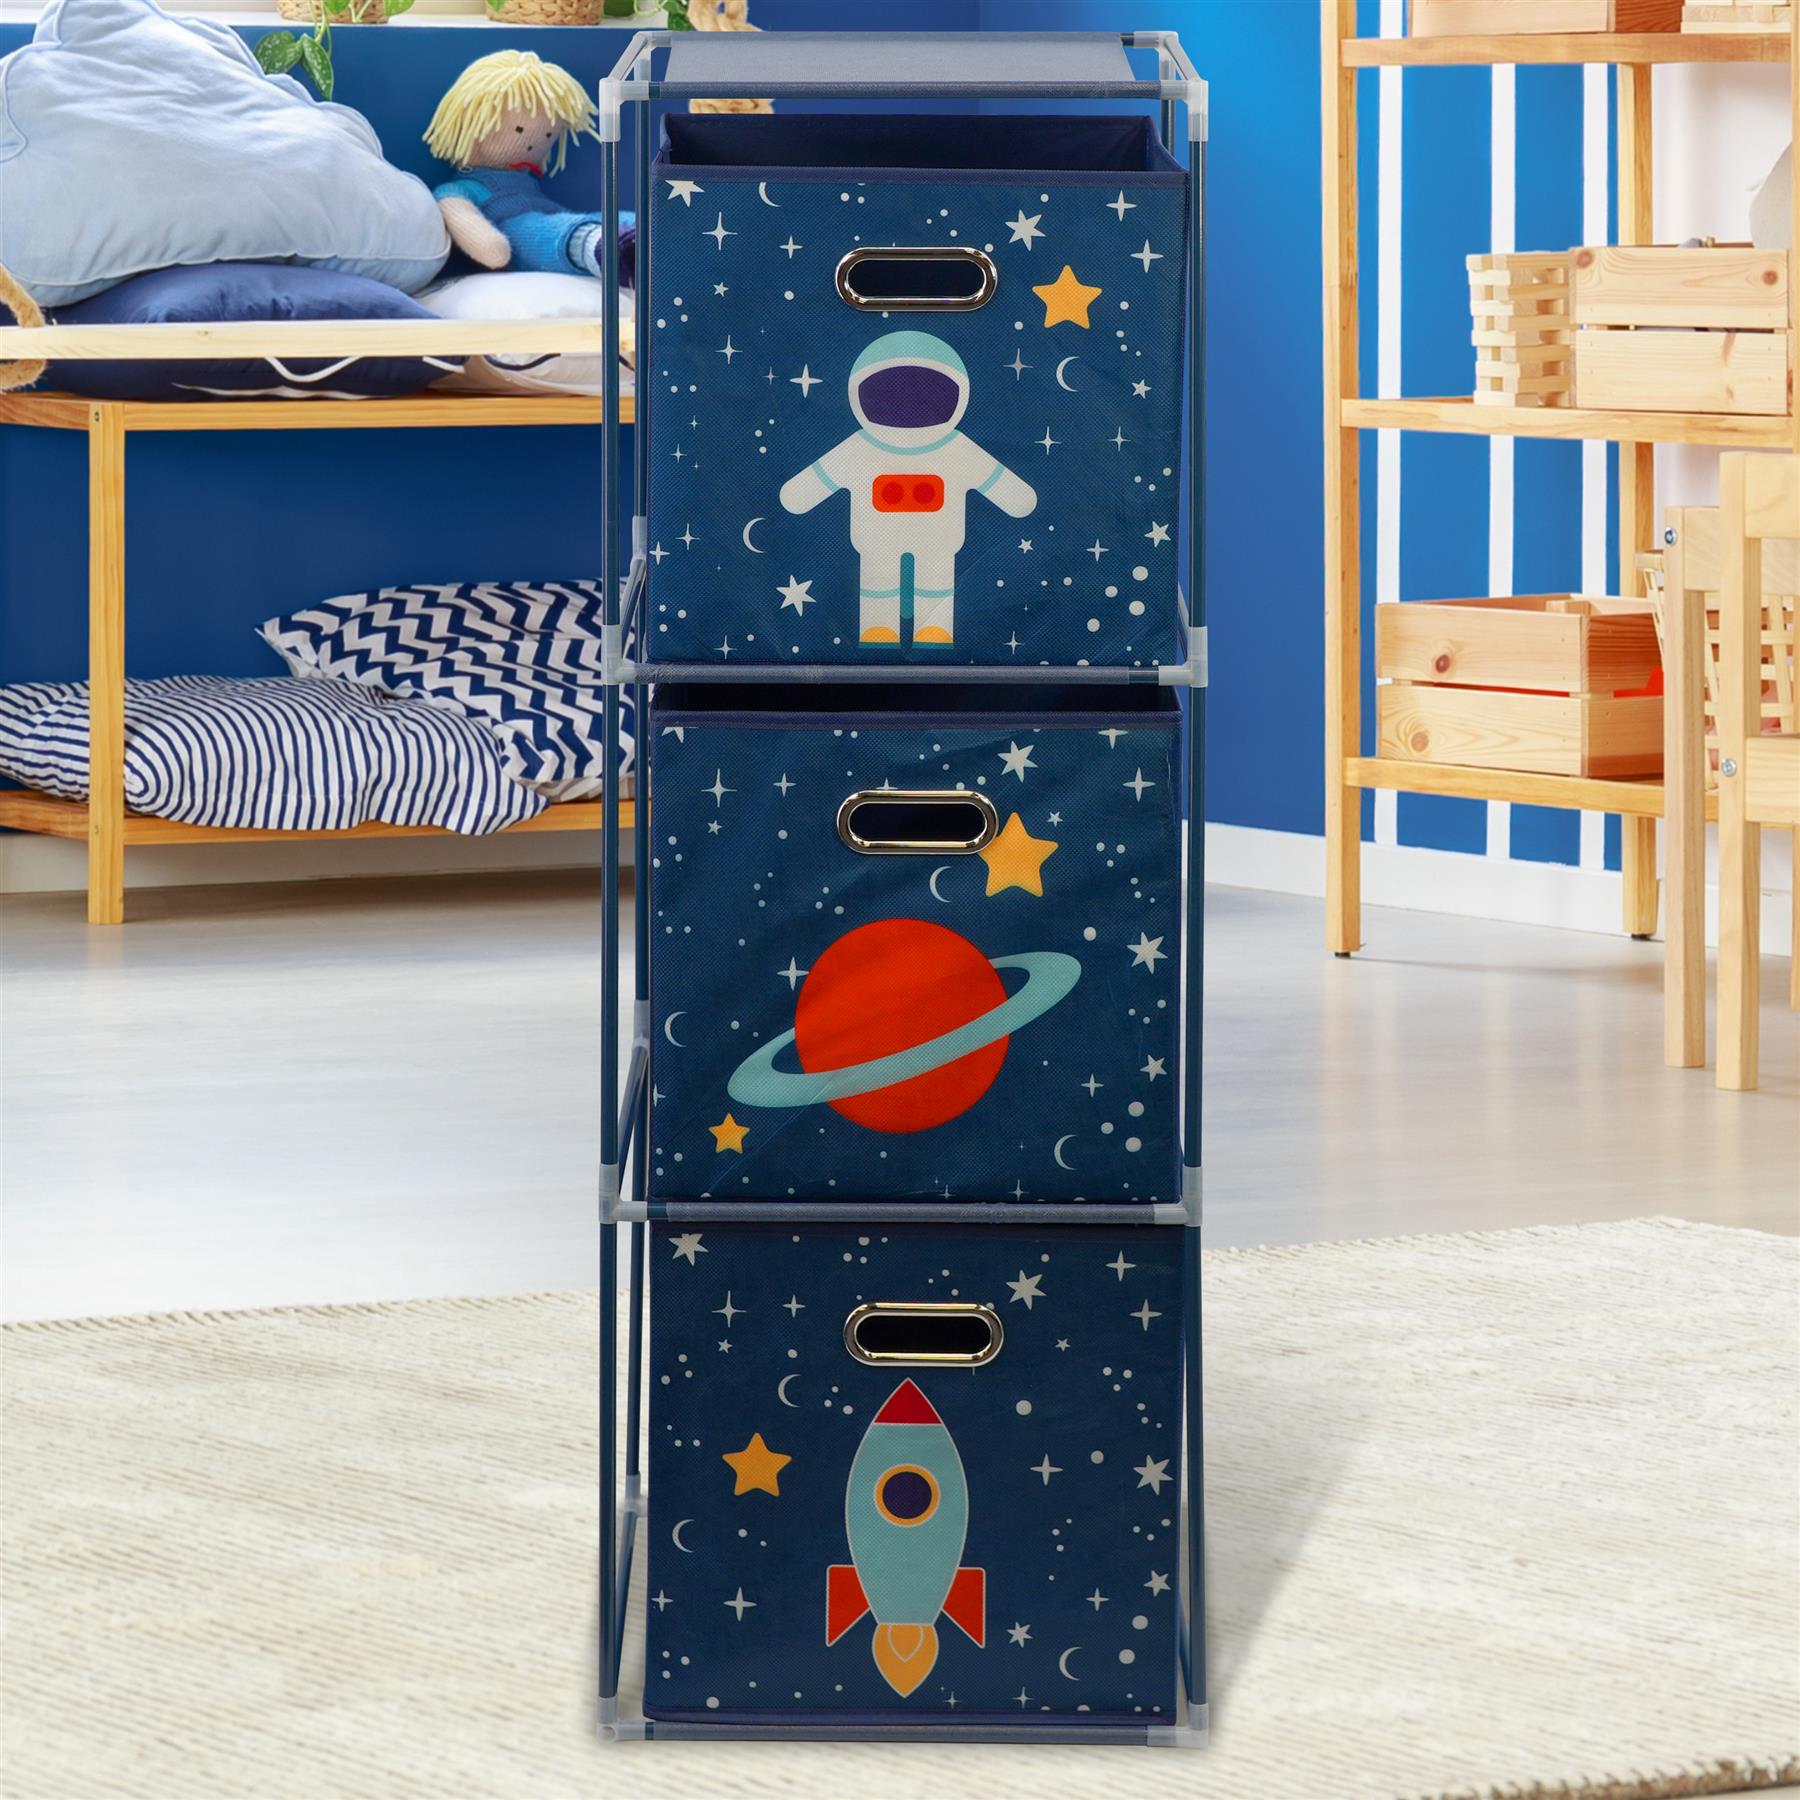 Kids Space Design Storage Cubes by The Magic Toy Shop - The Magic Toy Shop